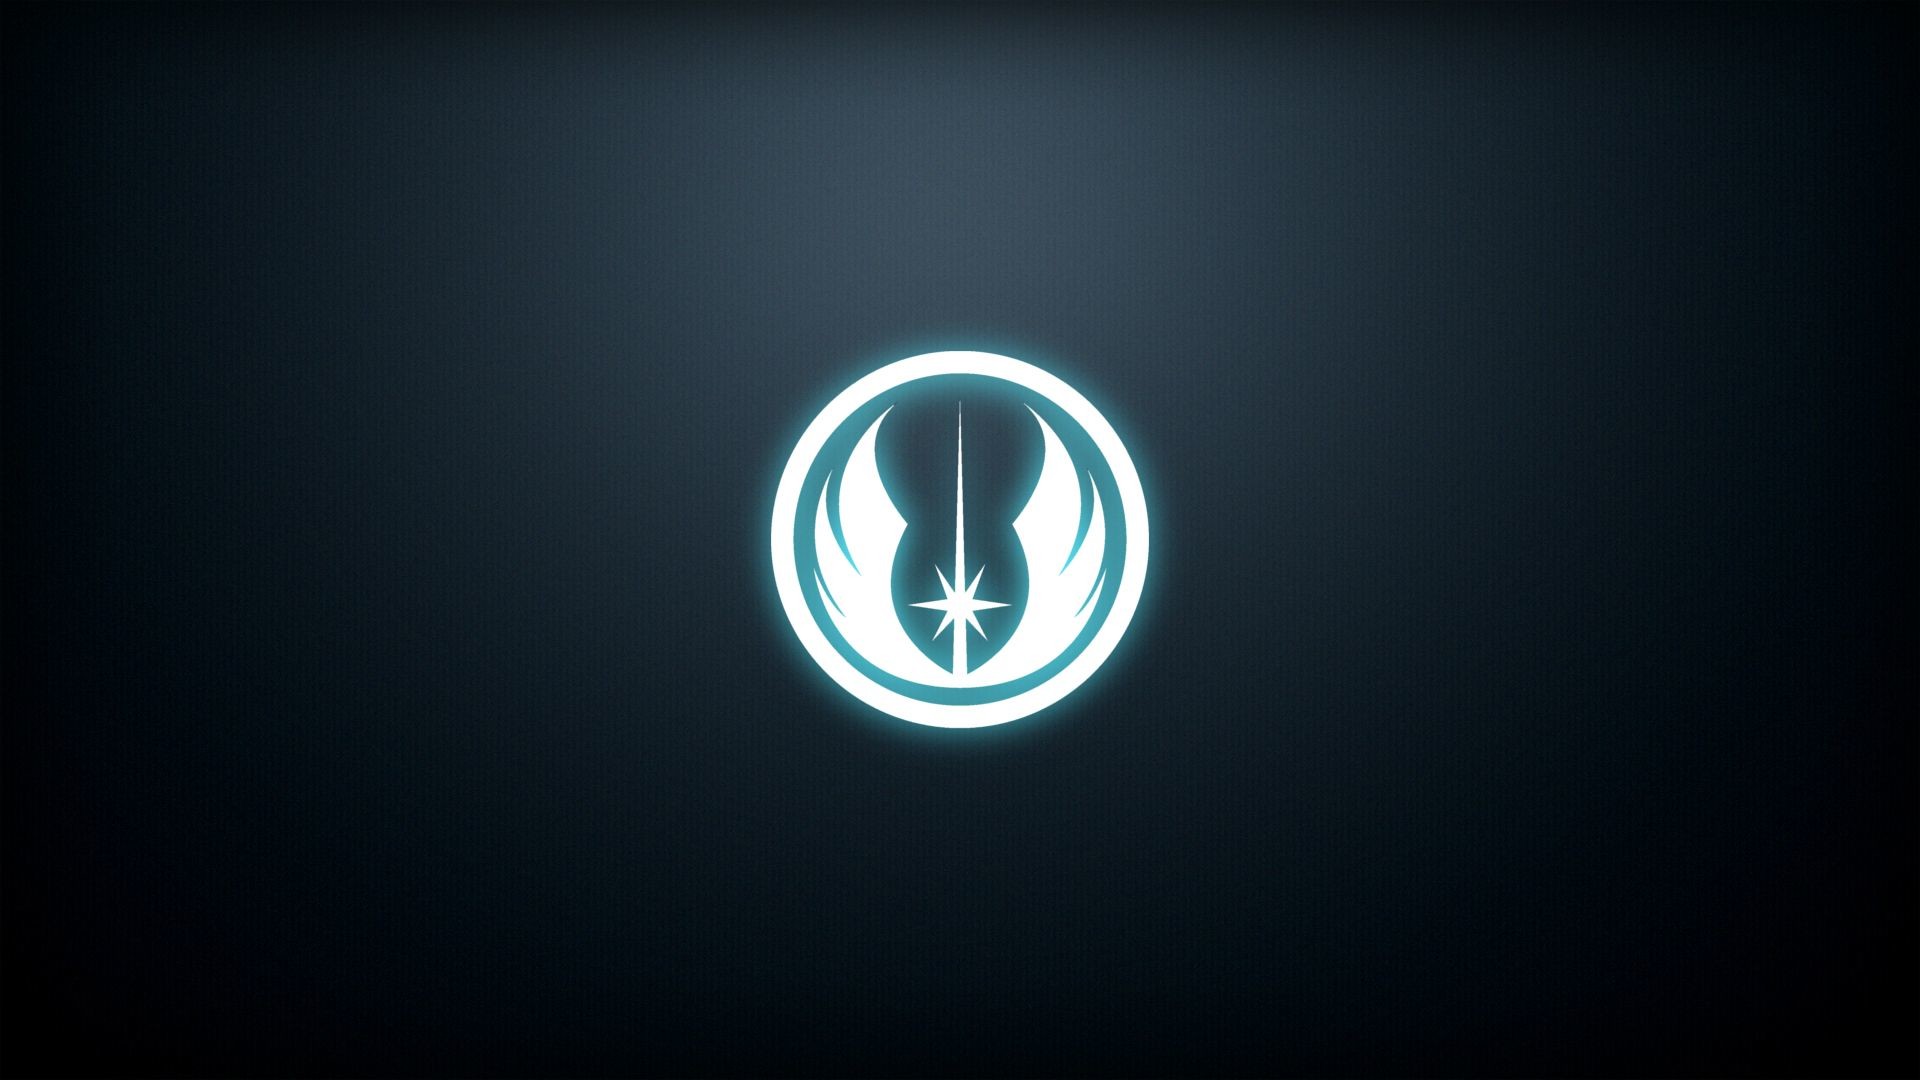 A wallpaper you guys might like. The Jedi Order emblem. I'll do a Sith one  too if people want me to. [1920×1080].